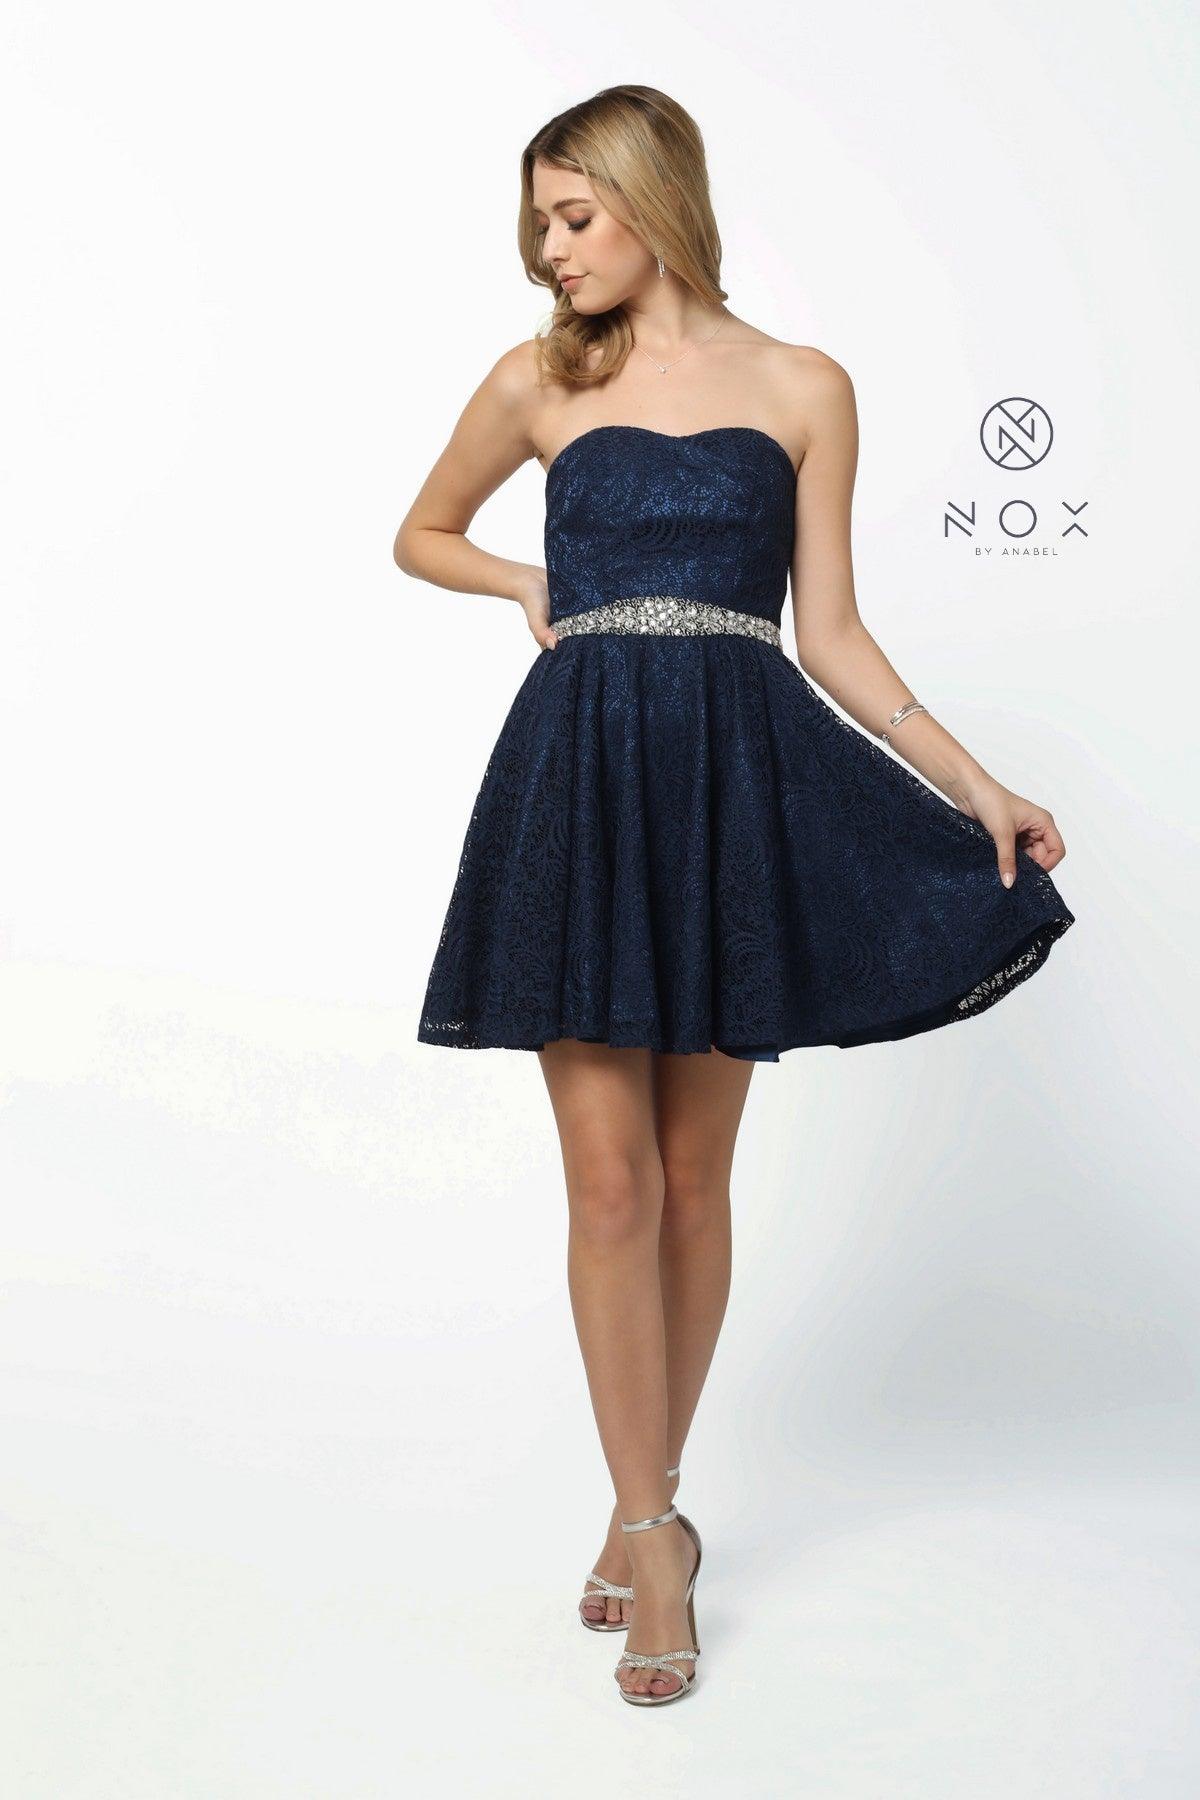 Short Strapless Formal Homecoming Dress - The Dress Outlet